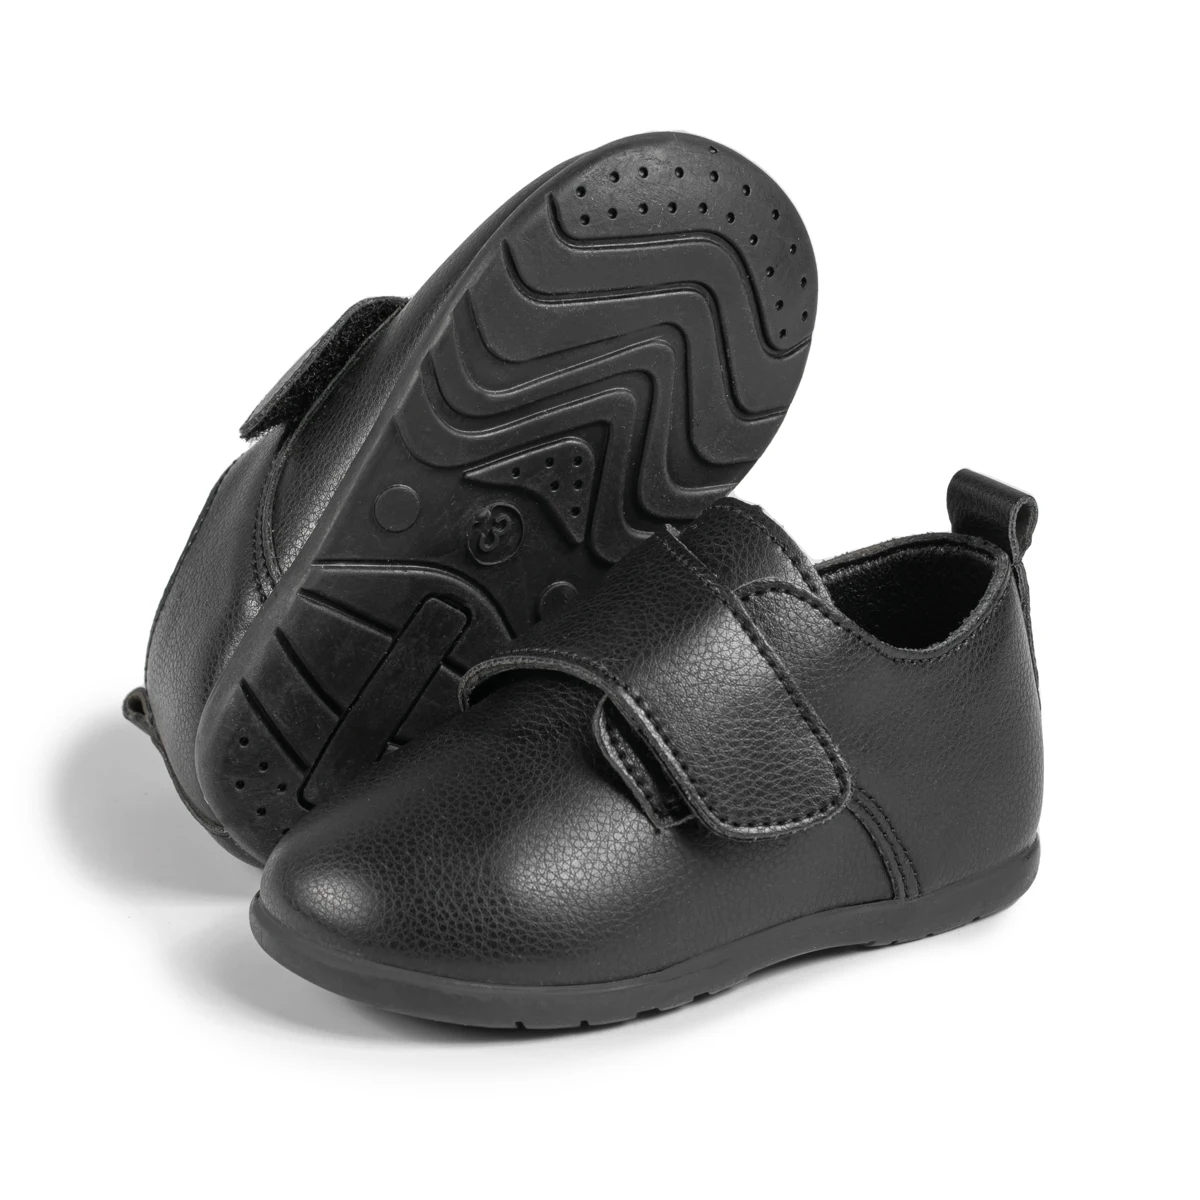 New Arrivals Outdoor Toddler Wedding Loafers PU leather Rubber Sole Non-Slip Baby Dress Shoes